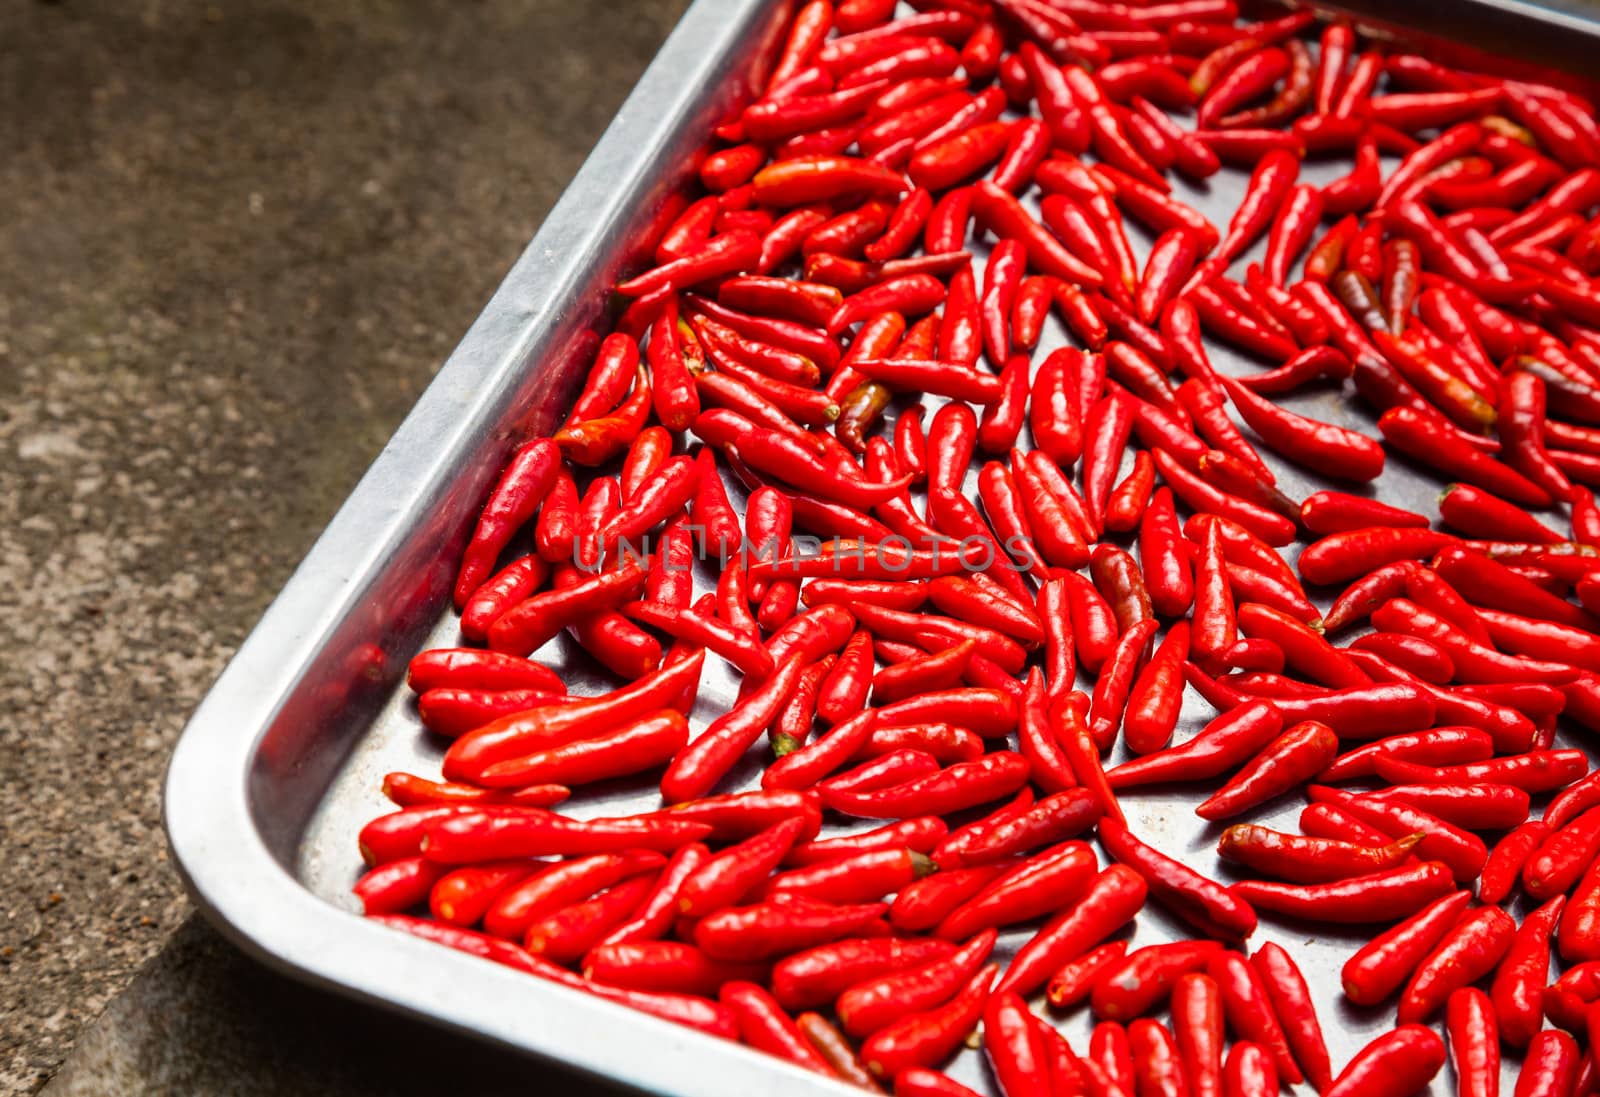 Chili peppers drying by naumoid